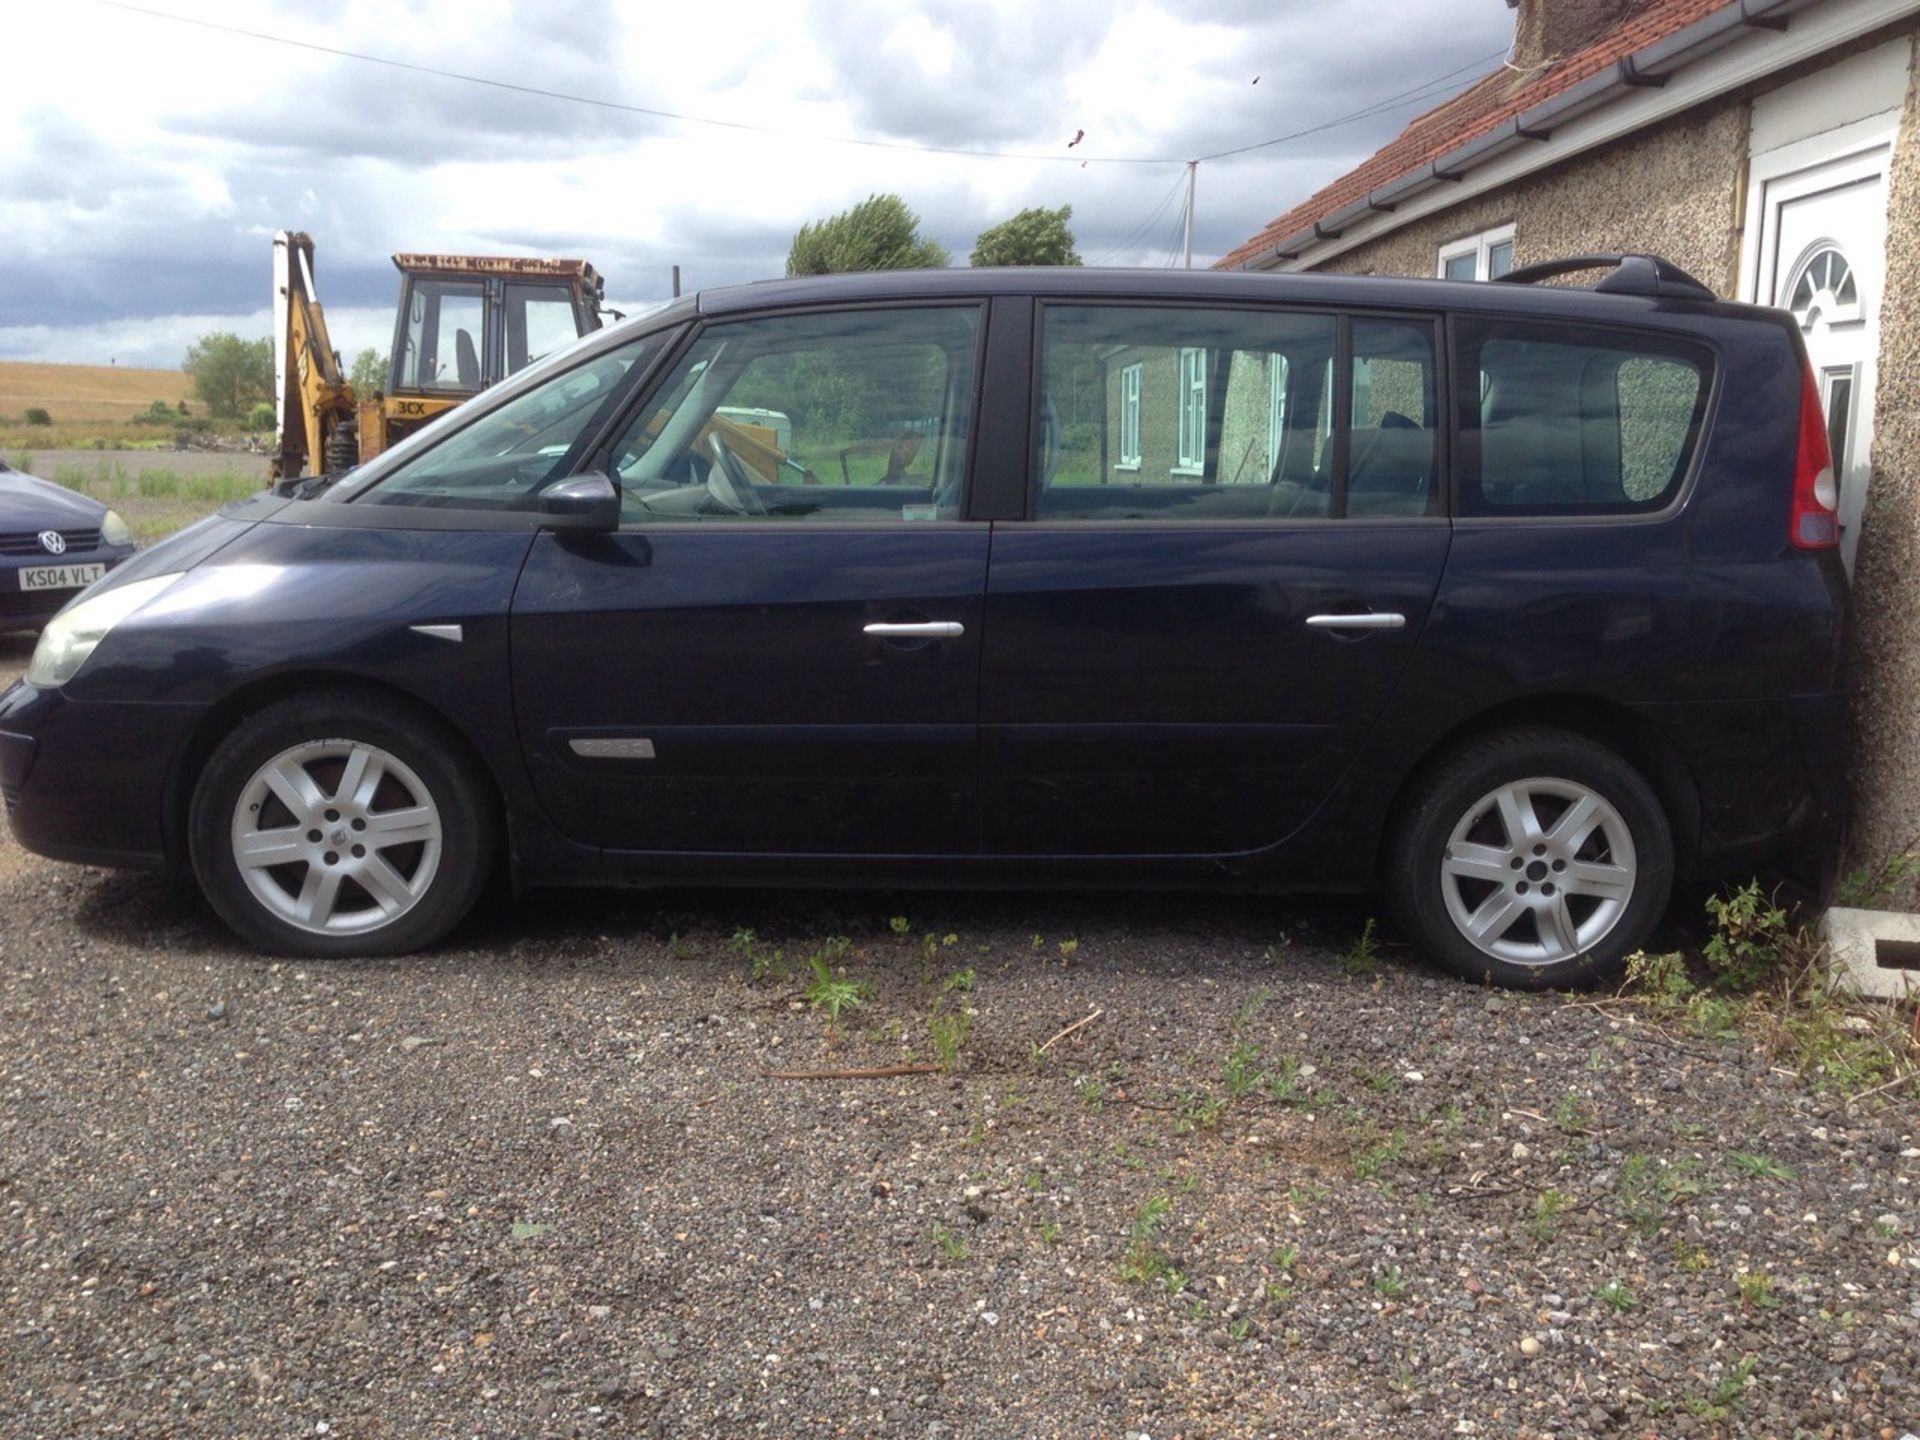 2005/54 Renault grand espace initiale dci a 2.2 diesel MPV - Image 7 of 7